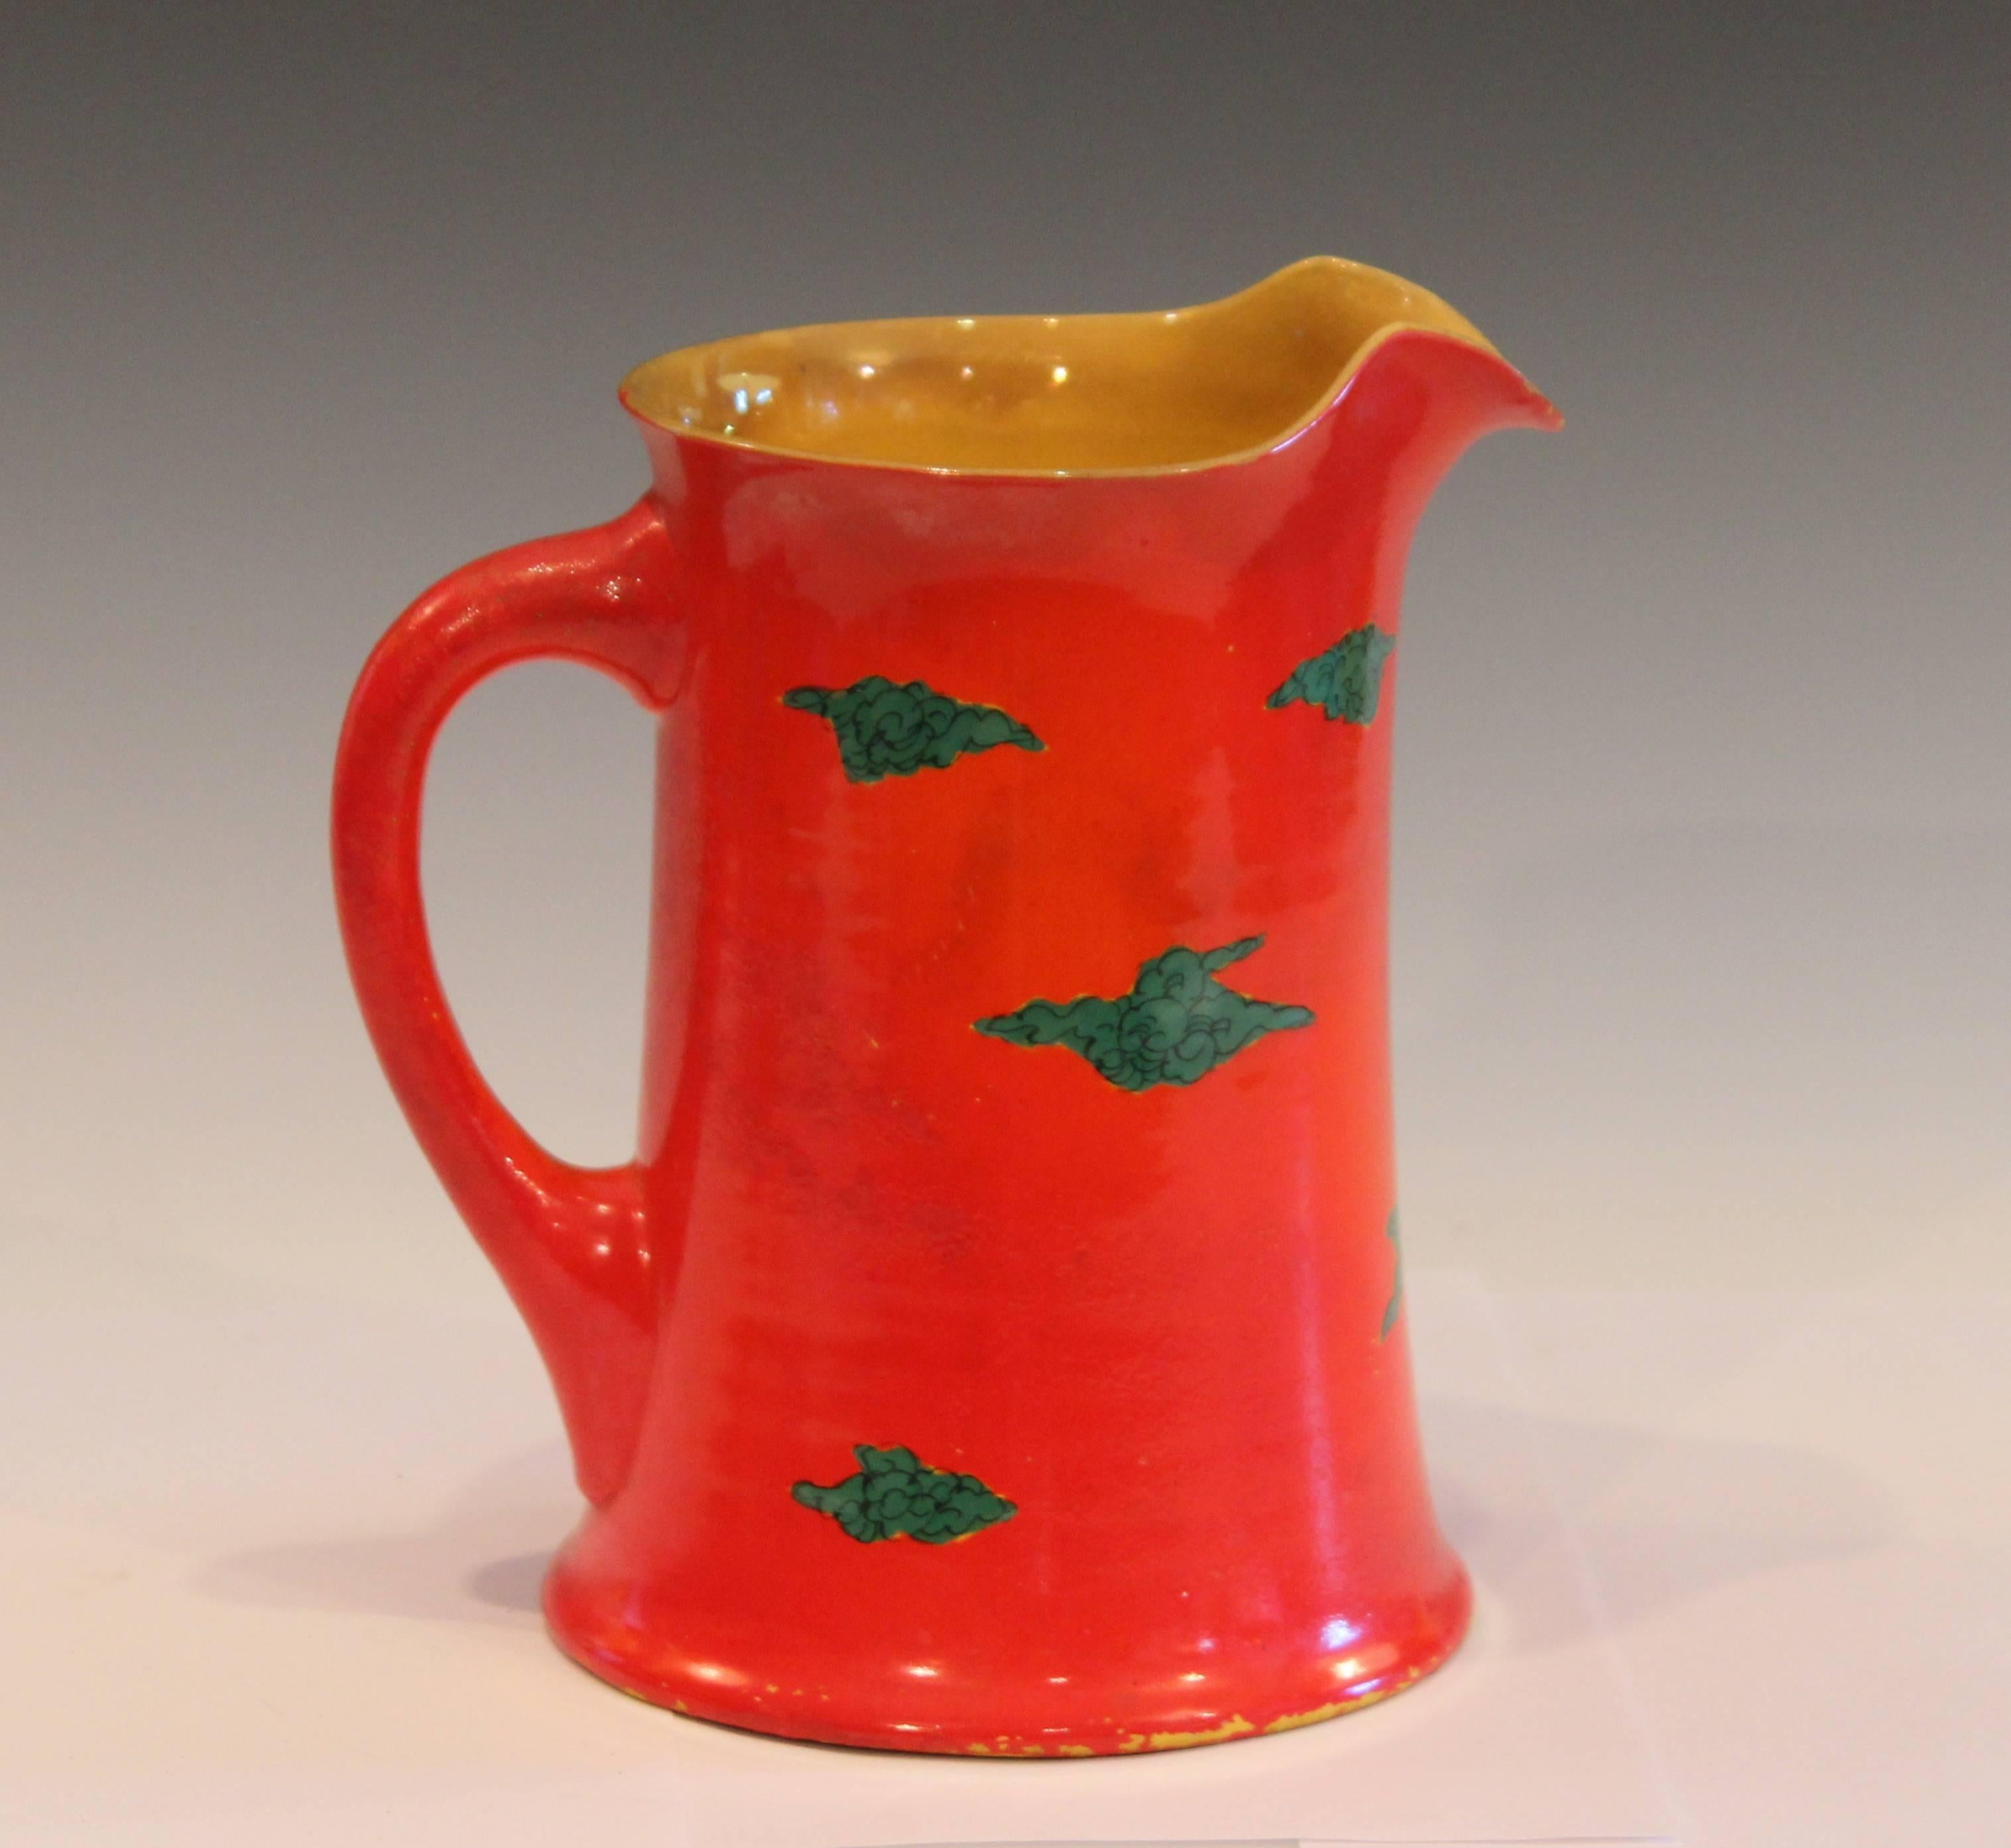 Unusual Awaji pottery pitcher with chrome red ground and dragon among the clouds theme, circa 1920. Measures: 8 1/4